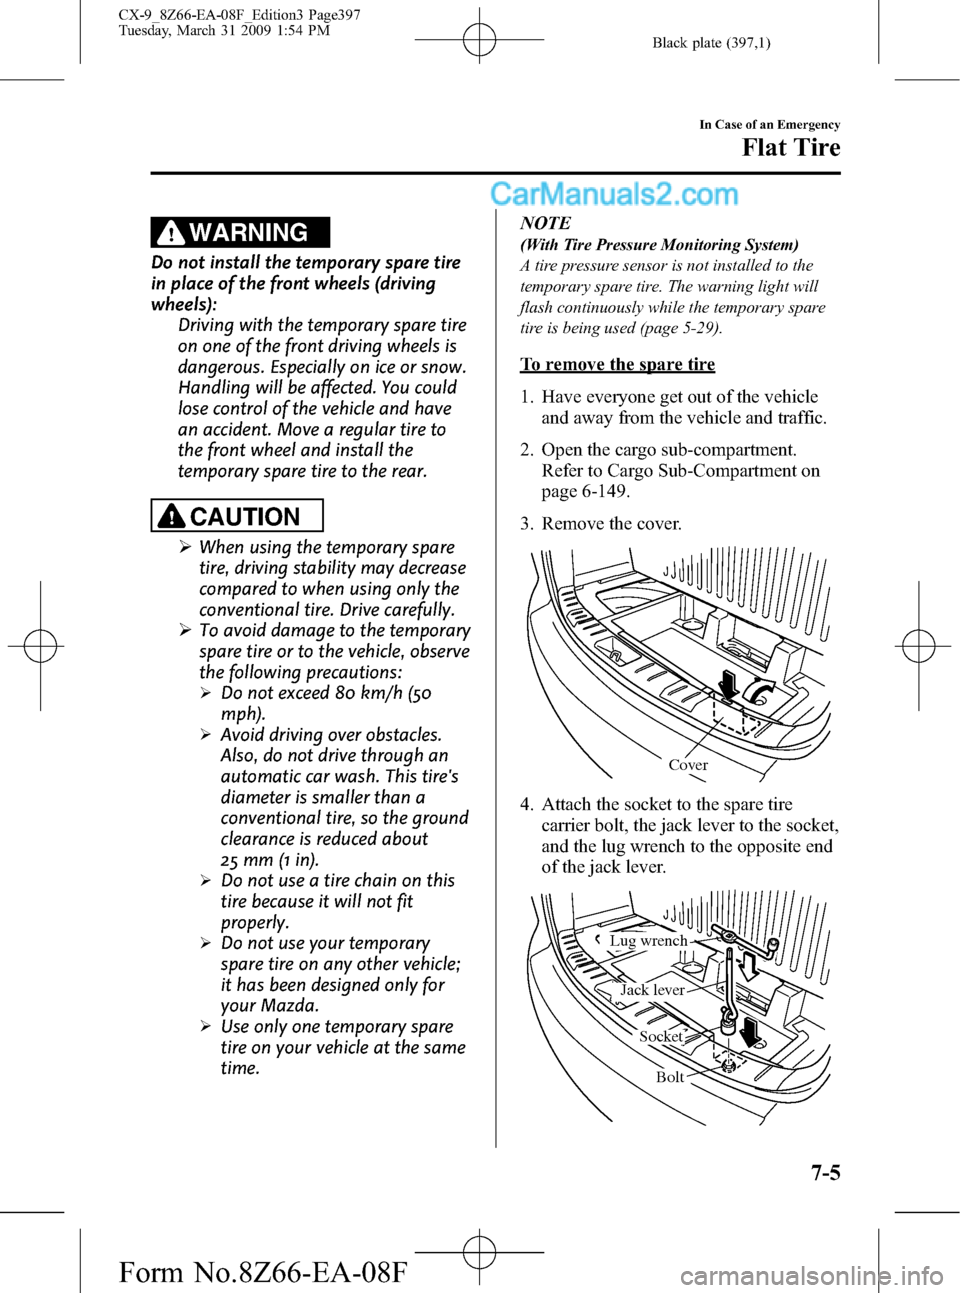 MAZDA MODEL CX-9 2009  Owners Manual (in English) Black plate (397,1)
WARNING
Do not install the temporary spare tire
in place of the front wheels (driving
wheels):
Driving with the temporary spare tire
on one of the front driving wheels is
dangerous